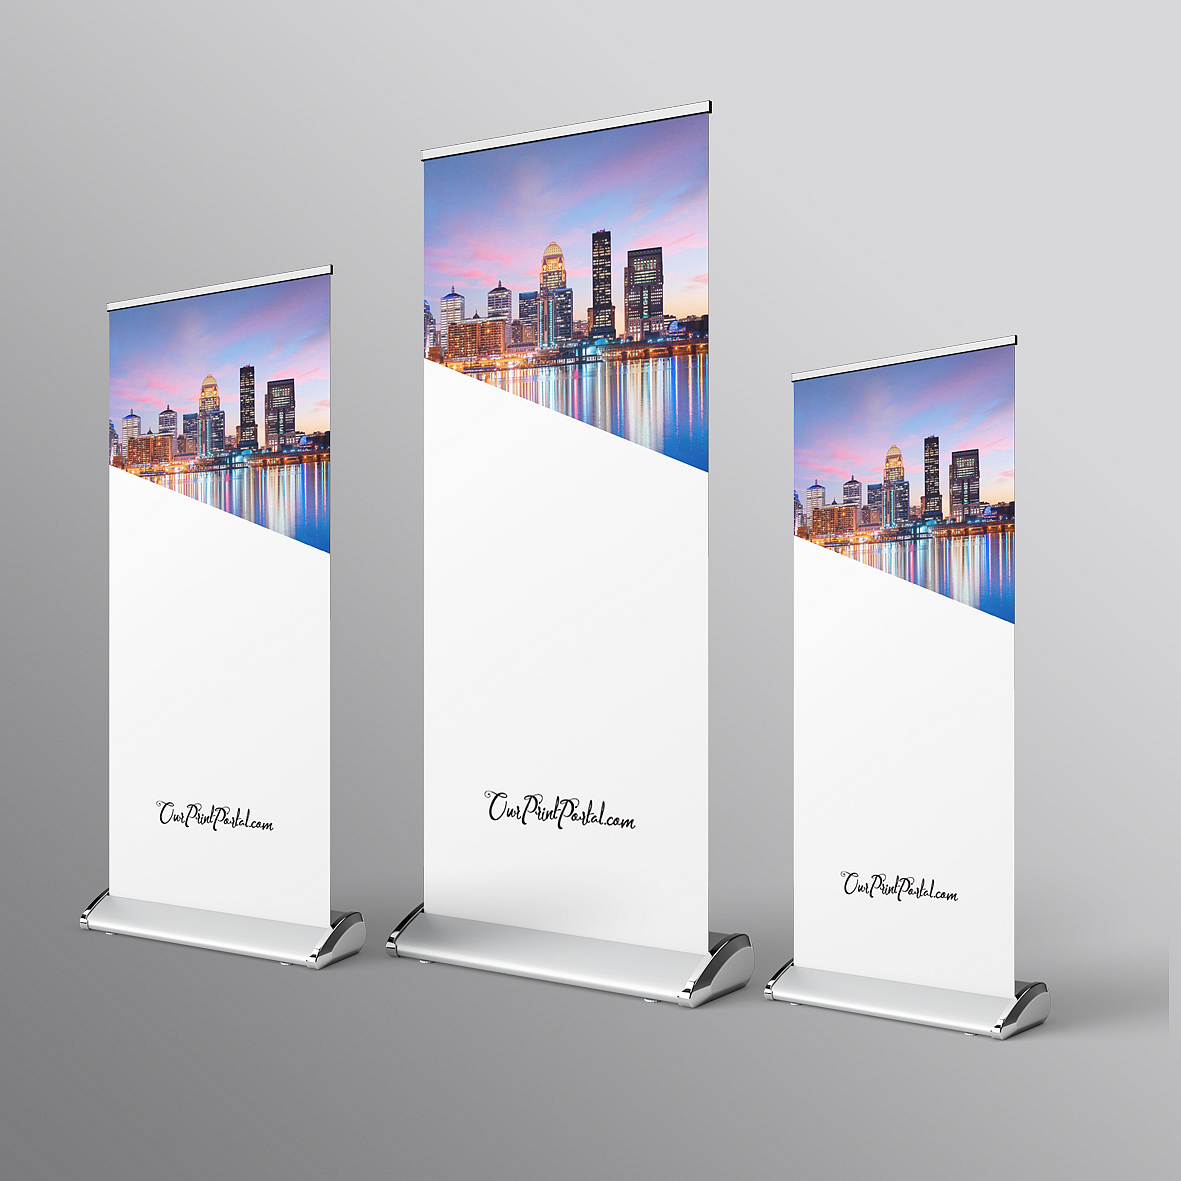 800mm Wide Roller Banners